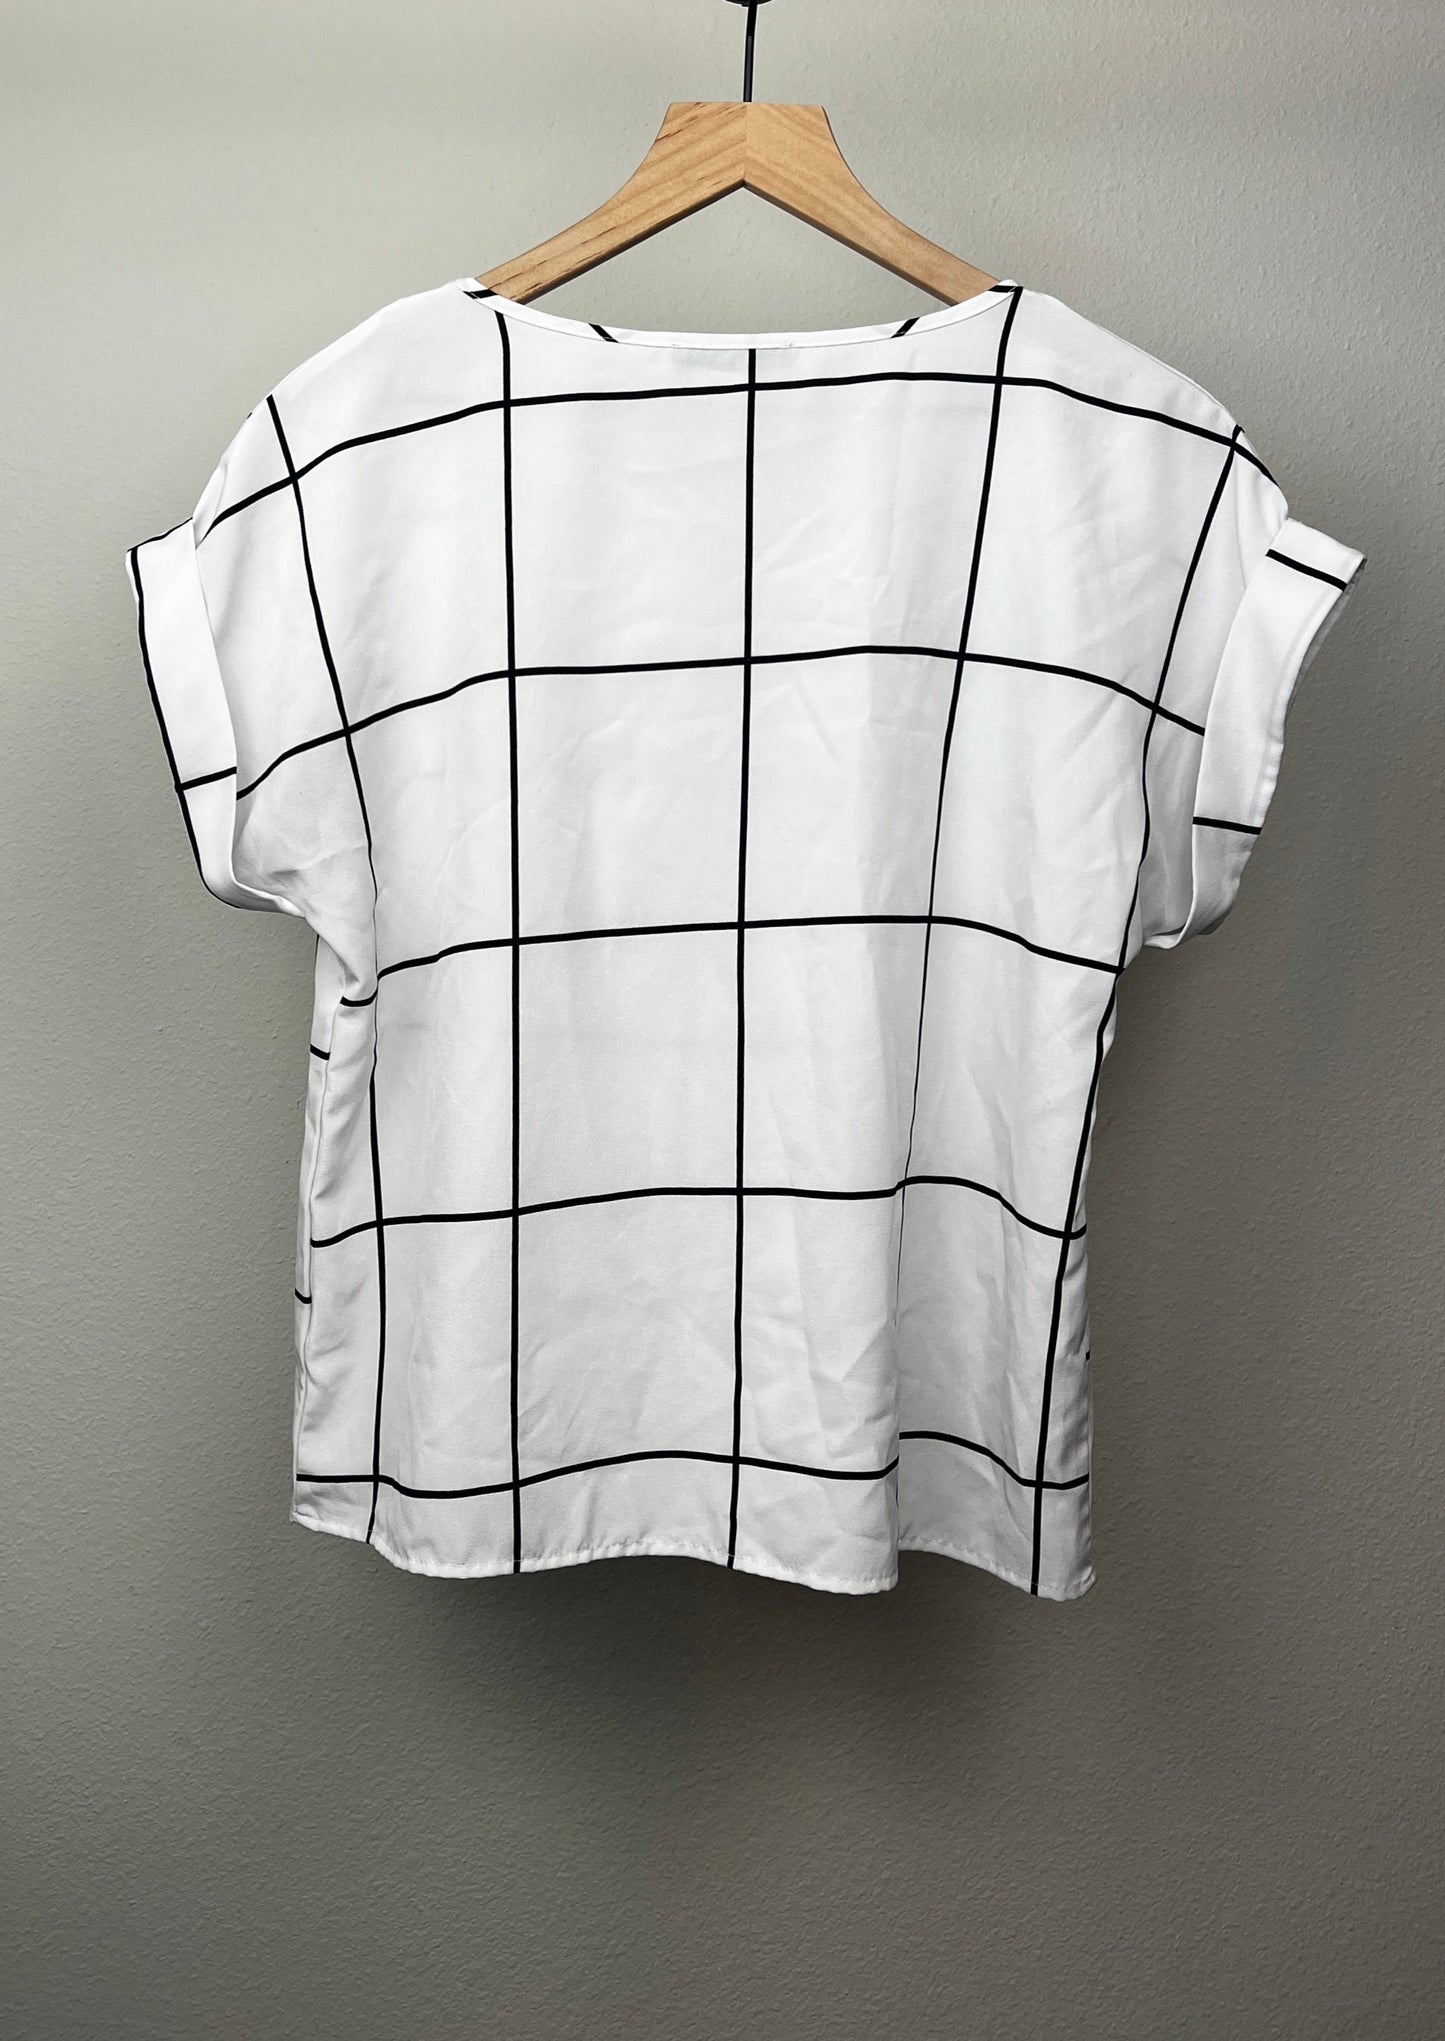 Black and White Blouse by Shein